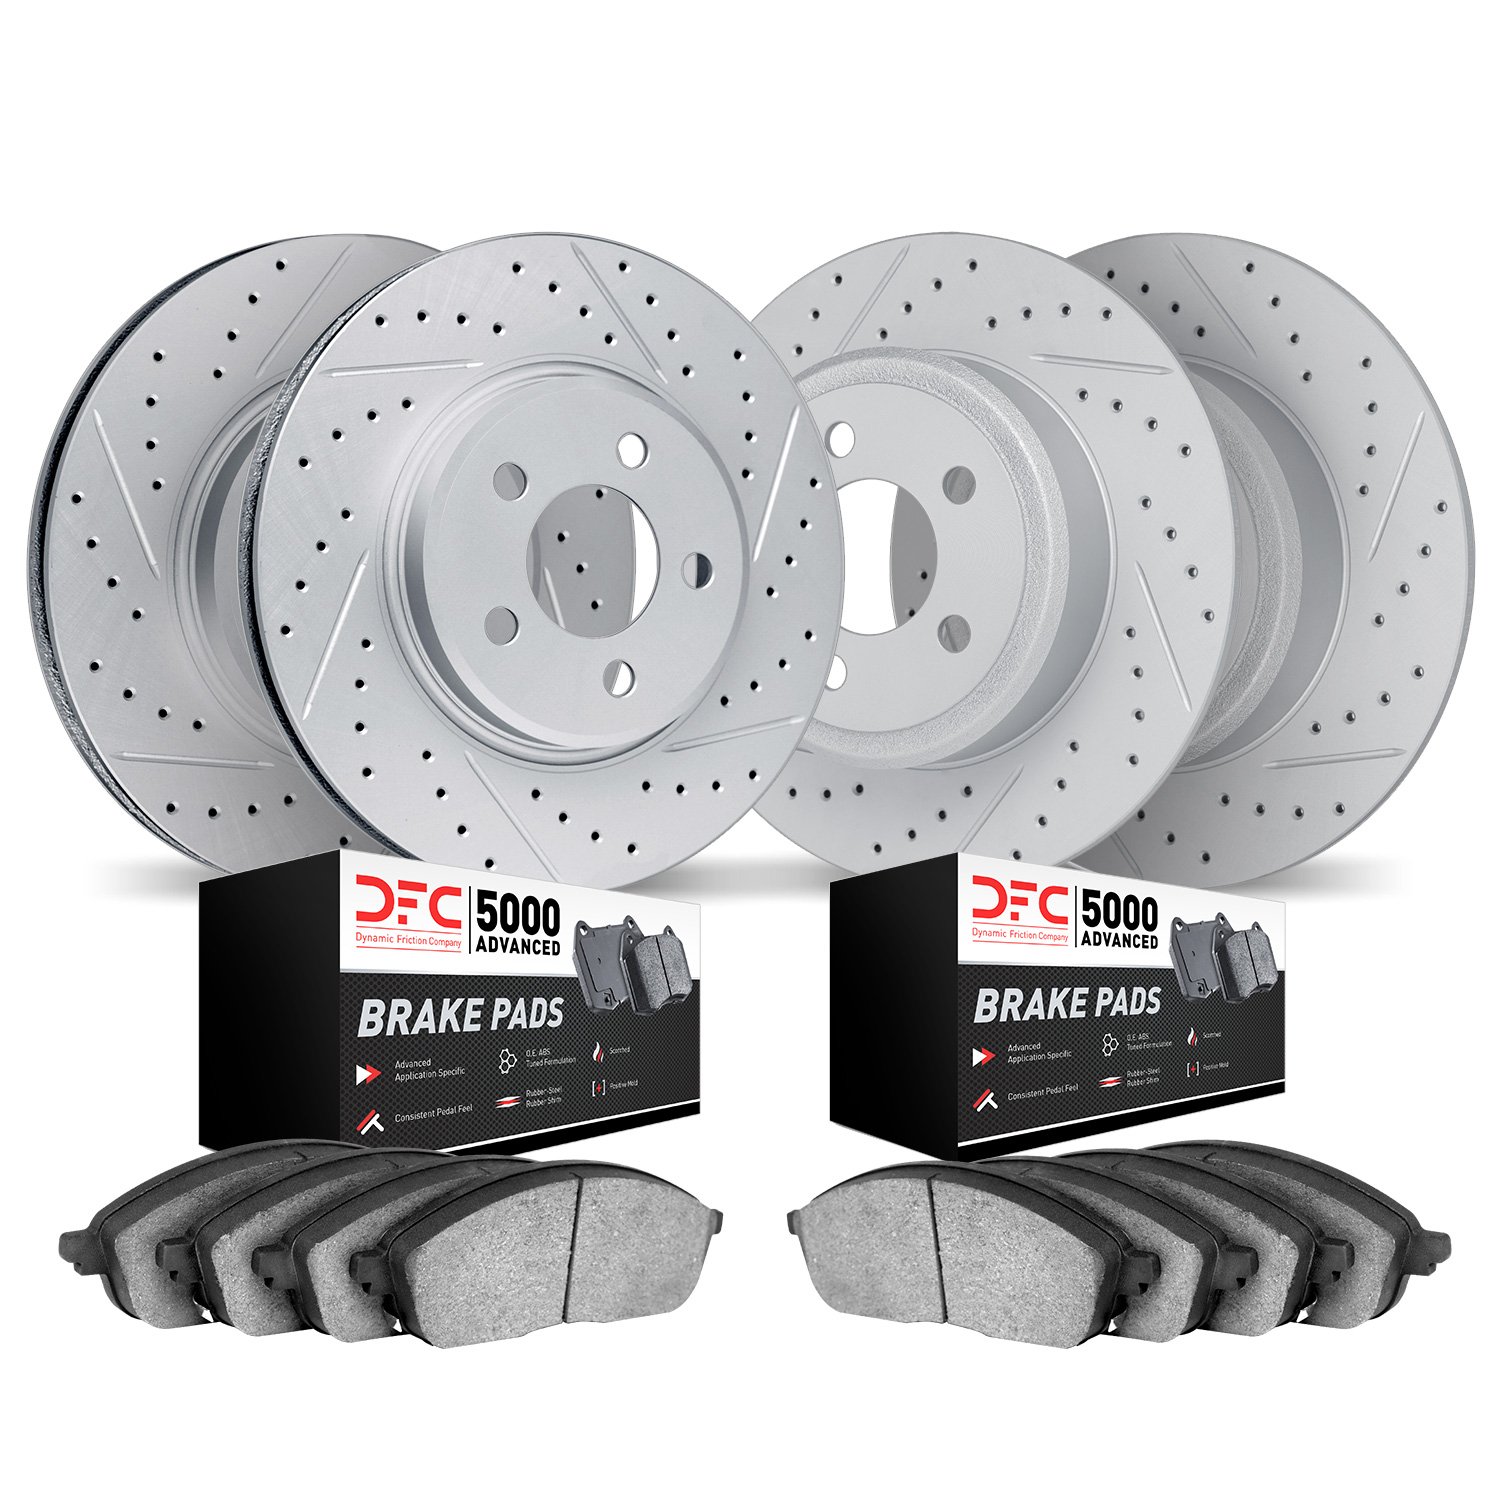 2504-55009 Geoperformance Drilled/Slotted Rotors w/5000 Advanced Brake Pads Kit, 2015-2020 Ford/Lincoln/Mercury/Mazda, Position: